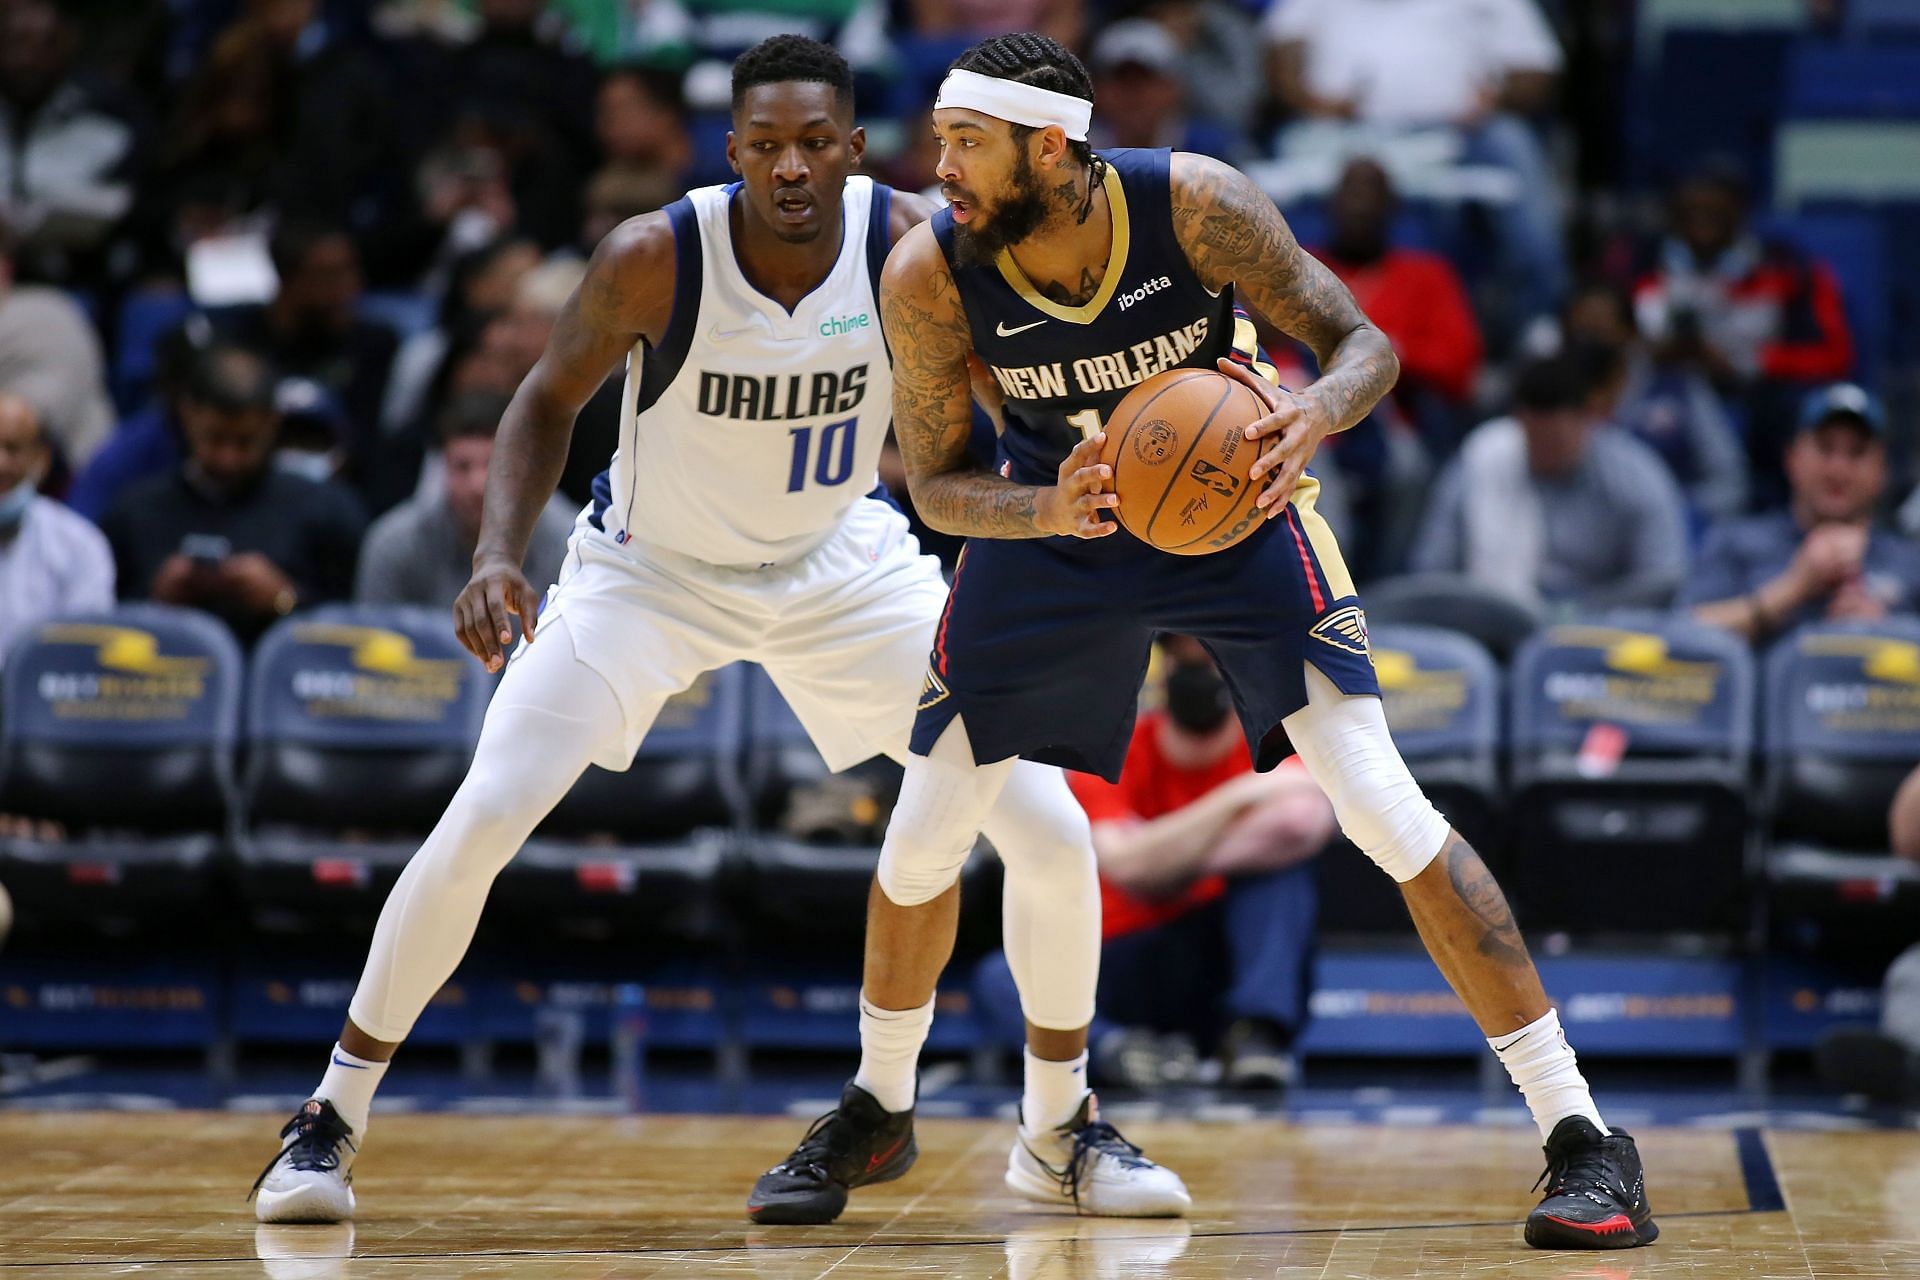 Brandon Ingram in action for the New Orleans Pelicans